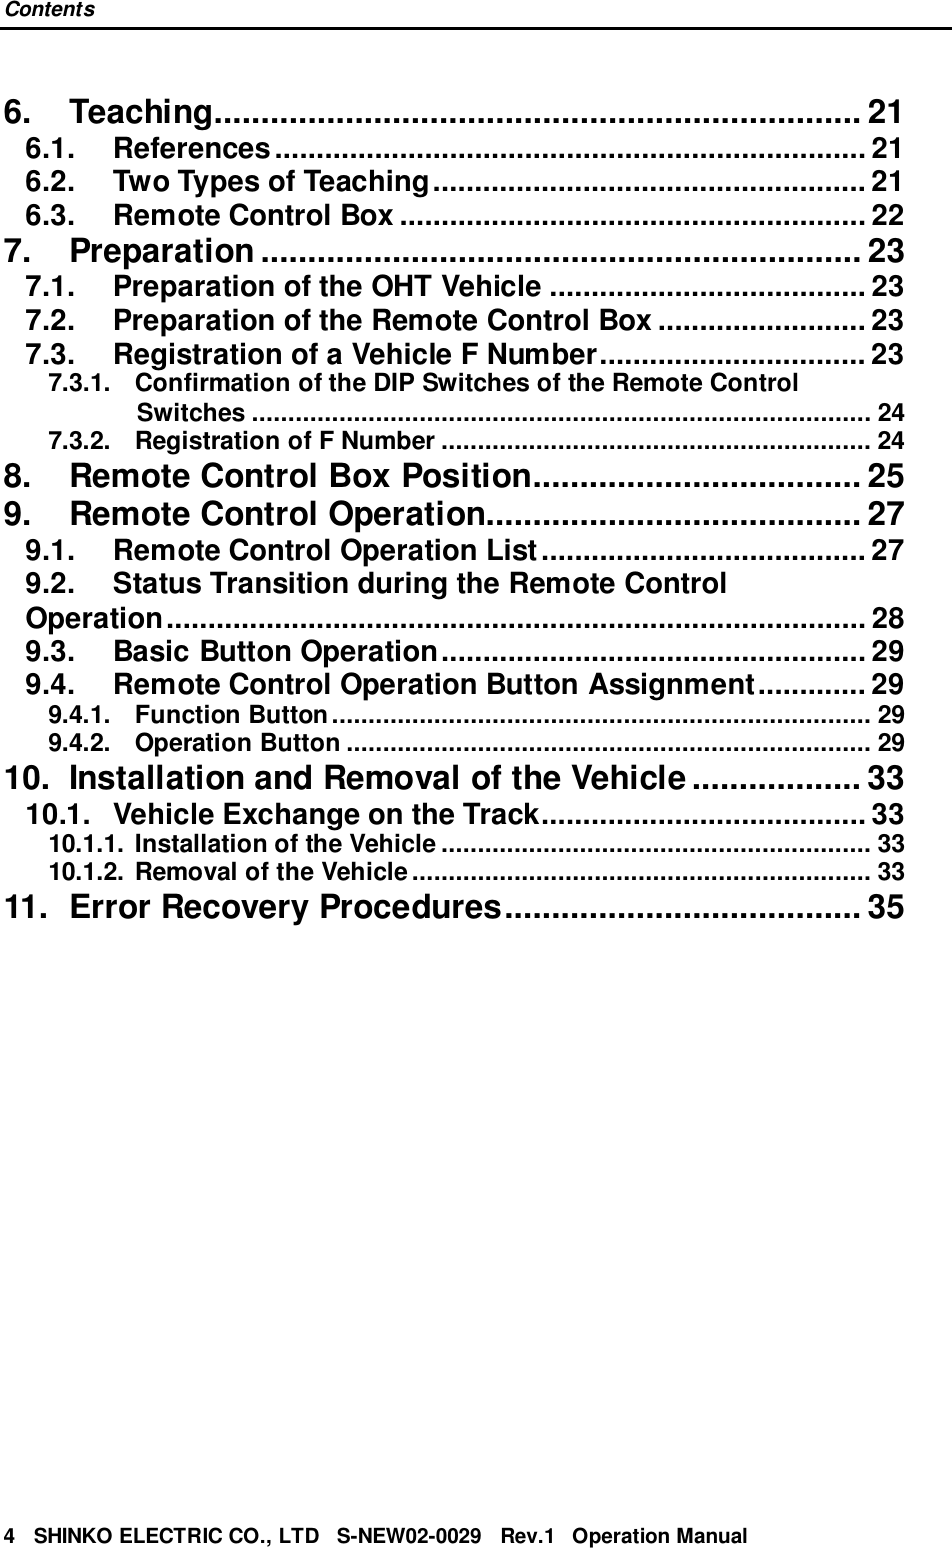 Contents4   SHINKO ELECTRIC CO., LTD   S-NEW02-0029   Rev.1   Operation Manual6. Teaching..................................................................... 216.1. References....................................................................... 216.2. Two Types of Teaching.................................................... 216.3. Remote Control Box ........................................................ 227. Preparation ................................................................ 237.1. Preparation of the OHT Vehicle ...................................... 237.2. Preparation of the Remote Control Box ......................... 237.3. Registration of a Vehicle F Number................................ 237.3.1. Confirmation of the DIP Switches of the Remote ControlSwitches ..................................................................................... 247.3.2. Registration of F Number ........................................................... 248. Remote Control Box Position................................... 259. Remote Control Operation........................................ 279.1. Remote Control Operation List....................................... 279.2. Status Transition during the Remote ControlOperation.................................................................................... 289.3. Basic Button Operation................................................... 299.4. Remote Control Operation Button Assignment............. 299.4.1. Function Button.......................................................................... 299.4.2. Operation Button ........................................................................ 2910. Installation and Removal of the Vehicle .................. 3310.1. Vehicle Exchange on the Track....................................... 3310.1.1. Installation of the Vehicle ........................................................... 3310.1.2. Removal of the Vehicle............................................................... 3311. Error Recovery Procedures...................................... 35